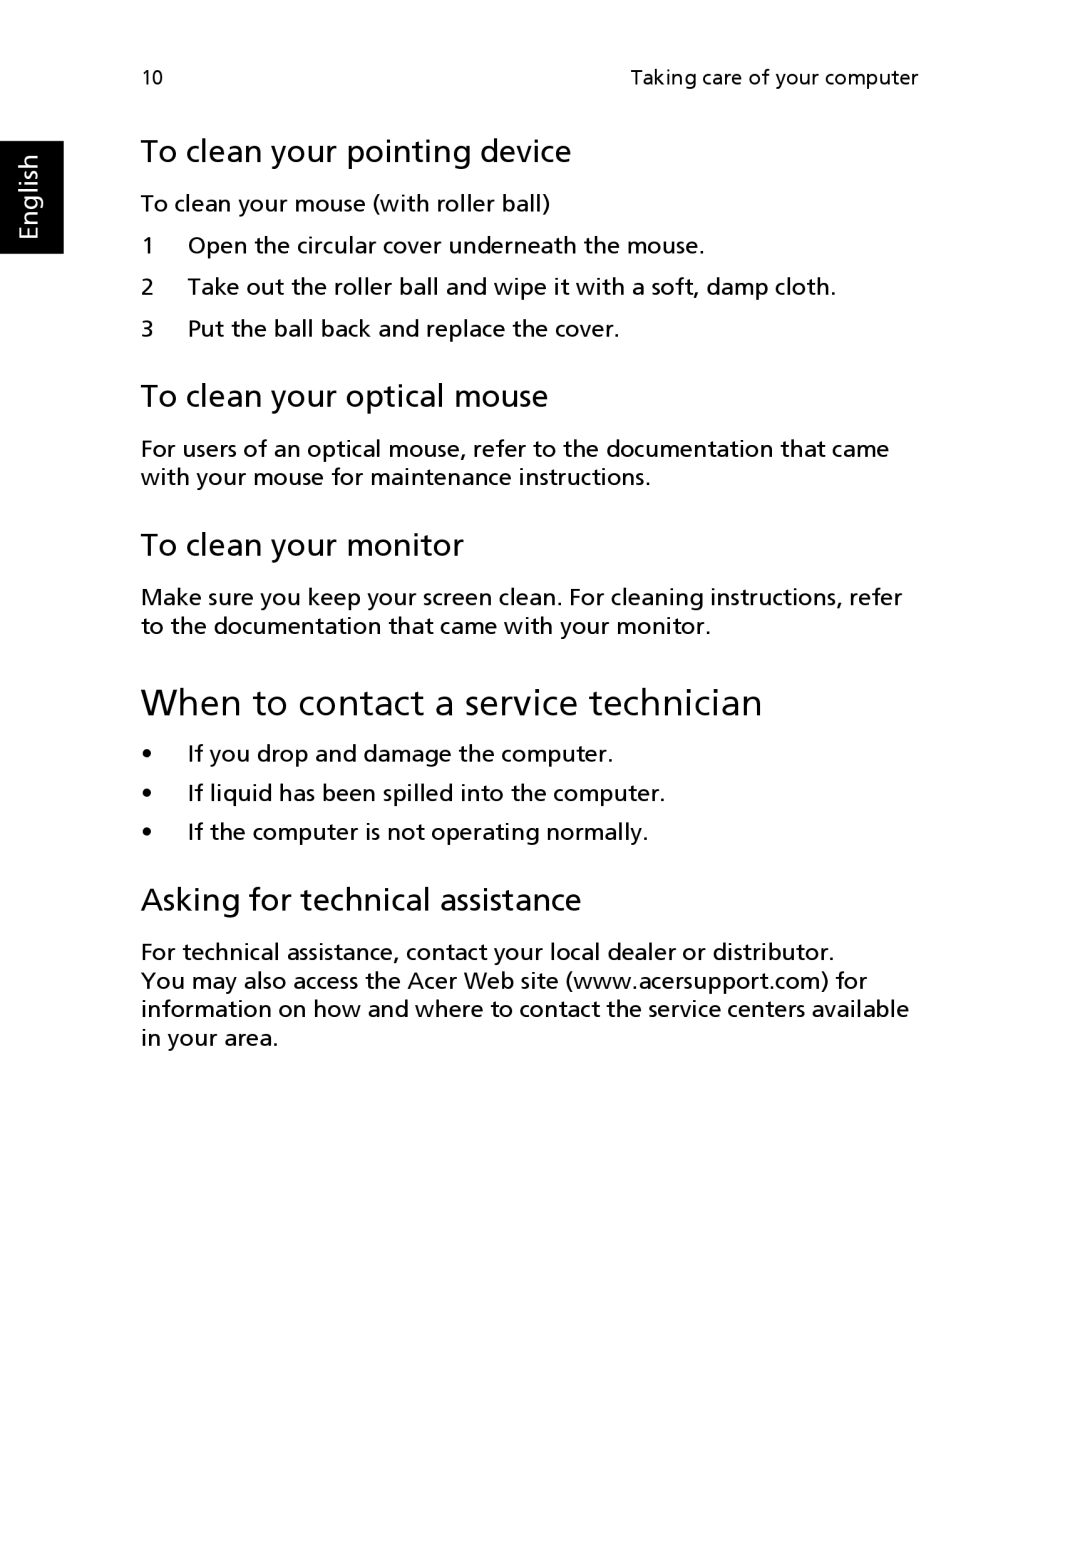 Acer POWER SERIES manual When to contact a service technician, To clean your pointing device, To clean your optical mouse 